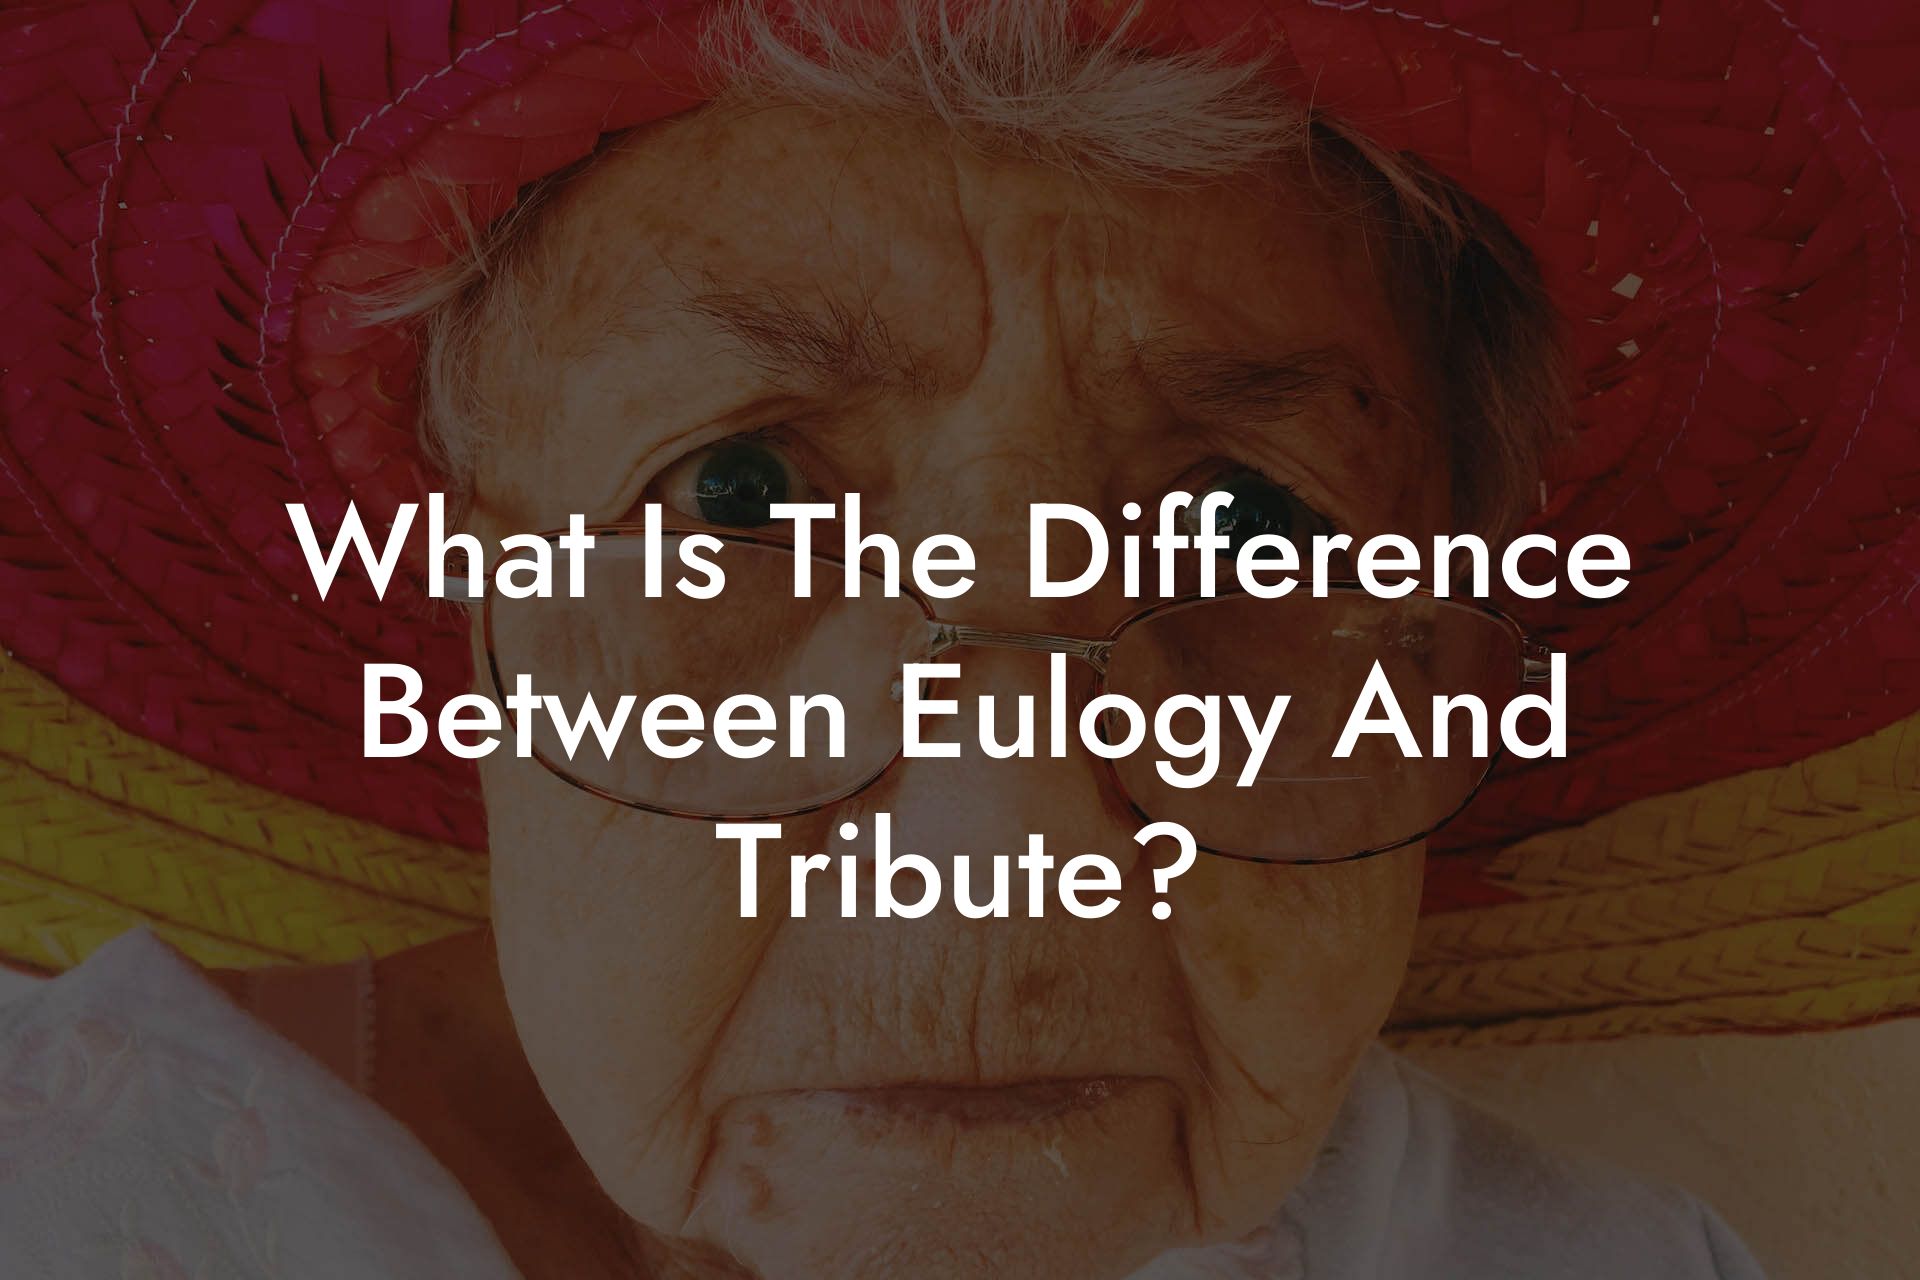 What Is The Difference Between Eulogy And Tribute?